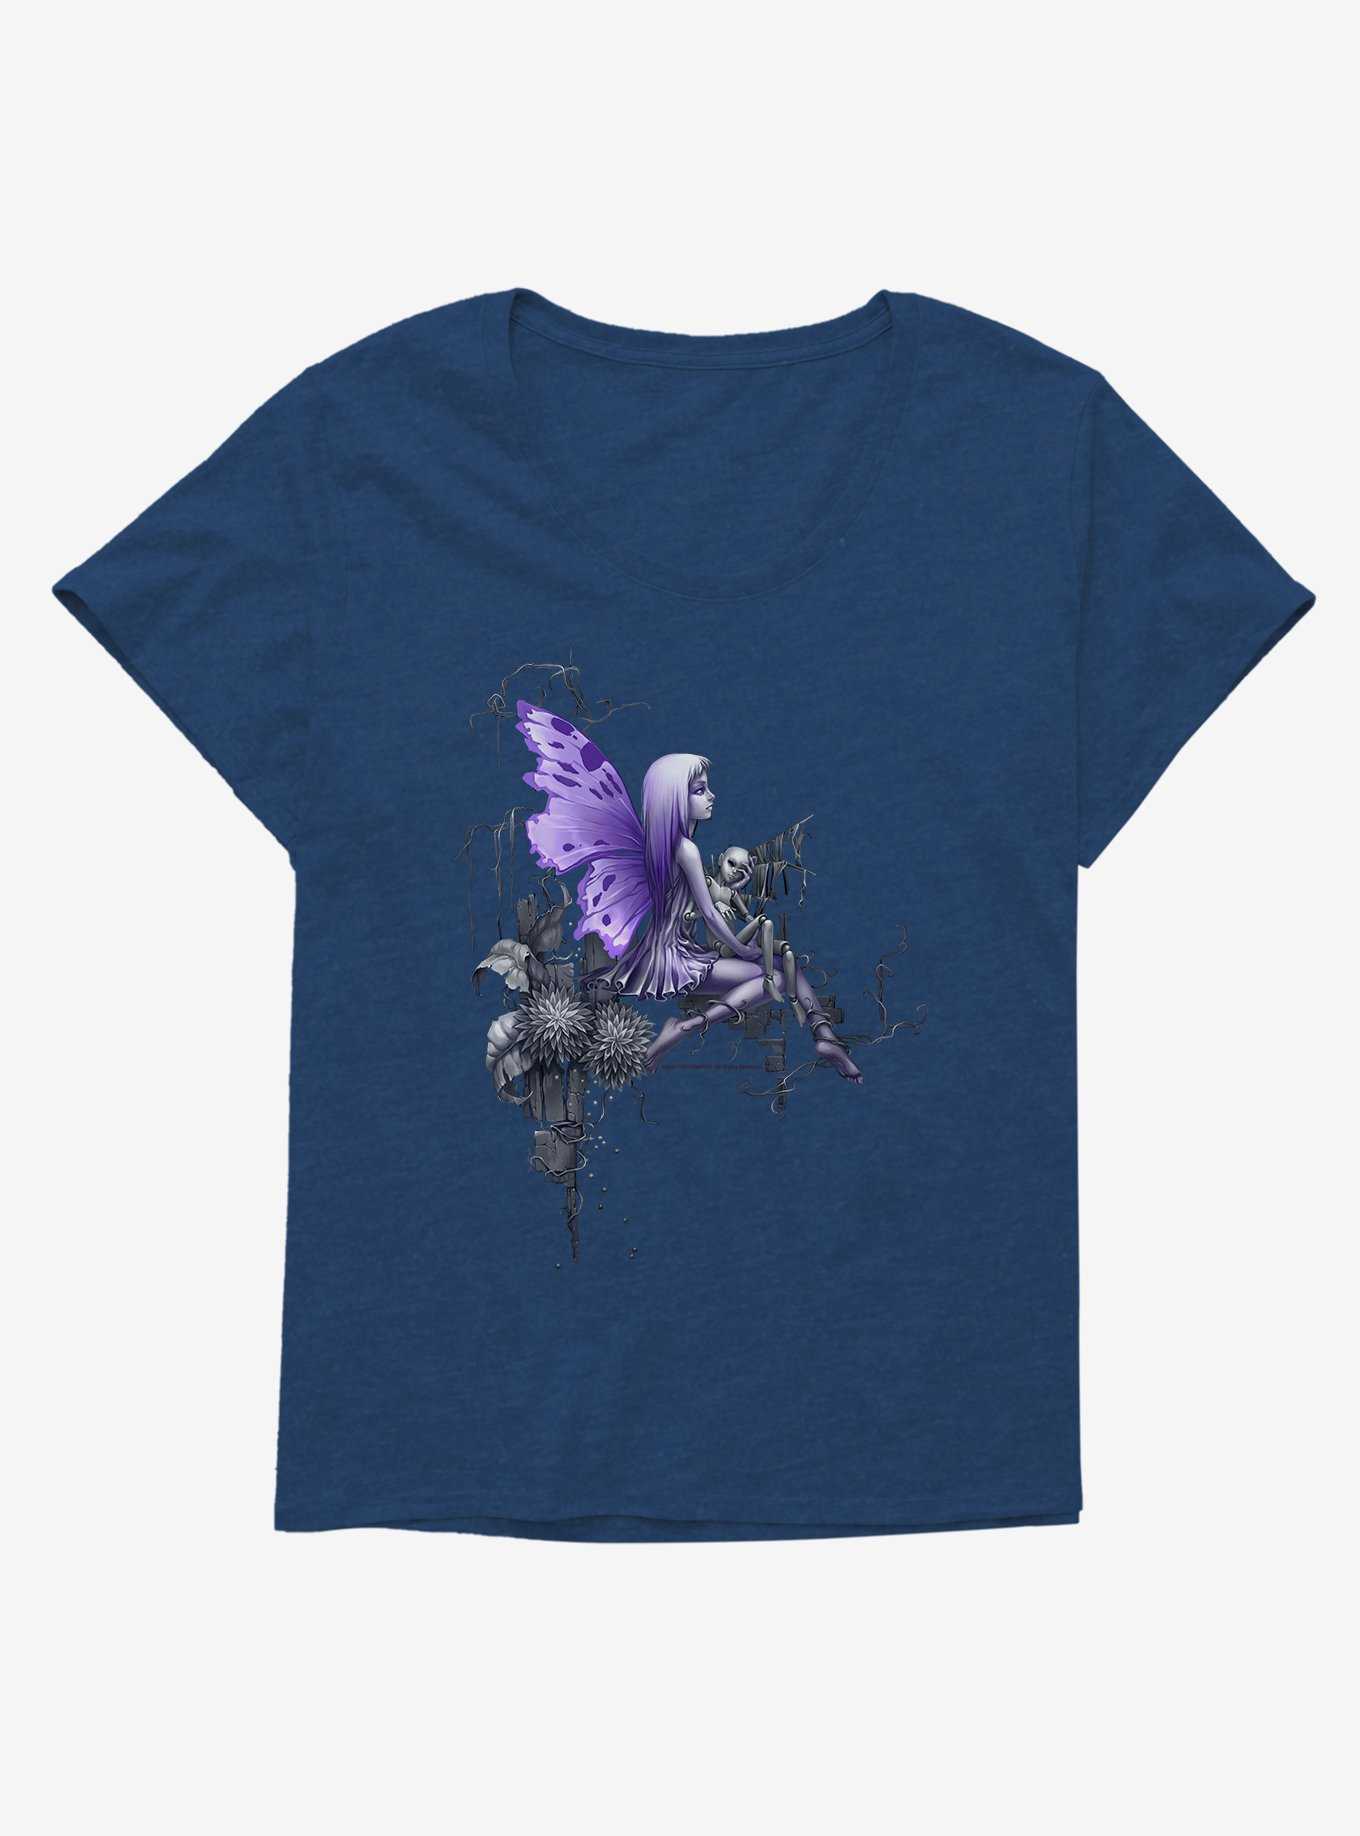 Fairies By Trick Purple Wing Fairy Girls T-Shirt Plus Size, , hi-res